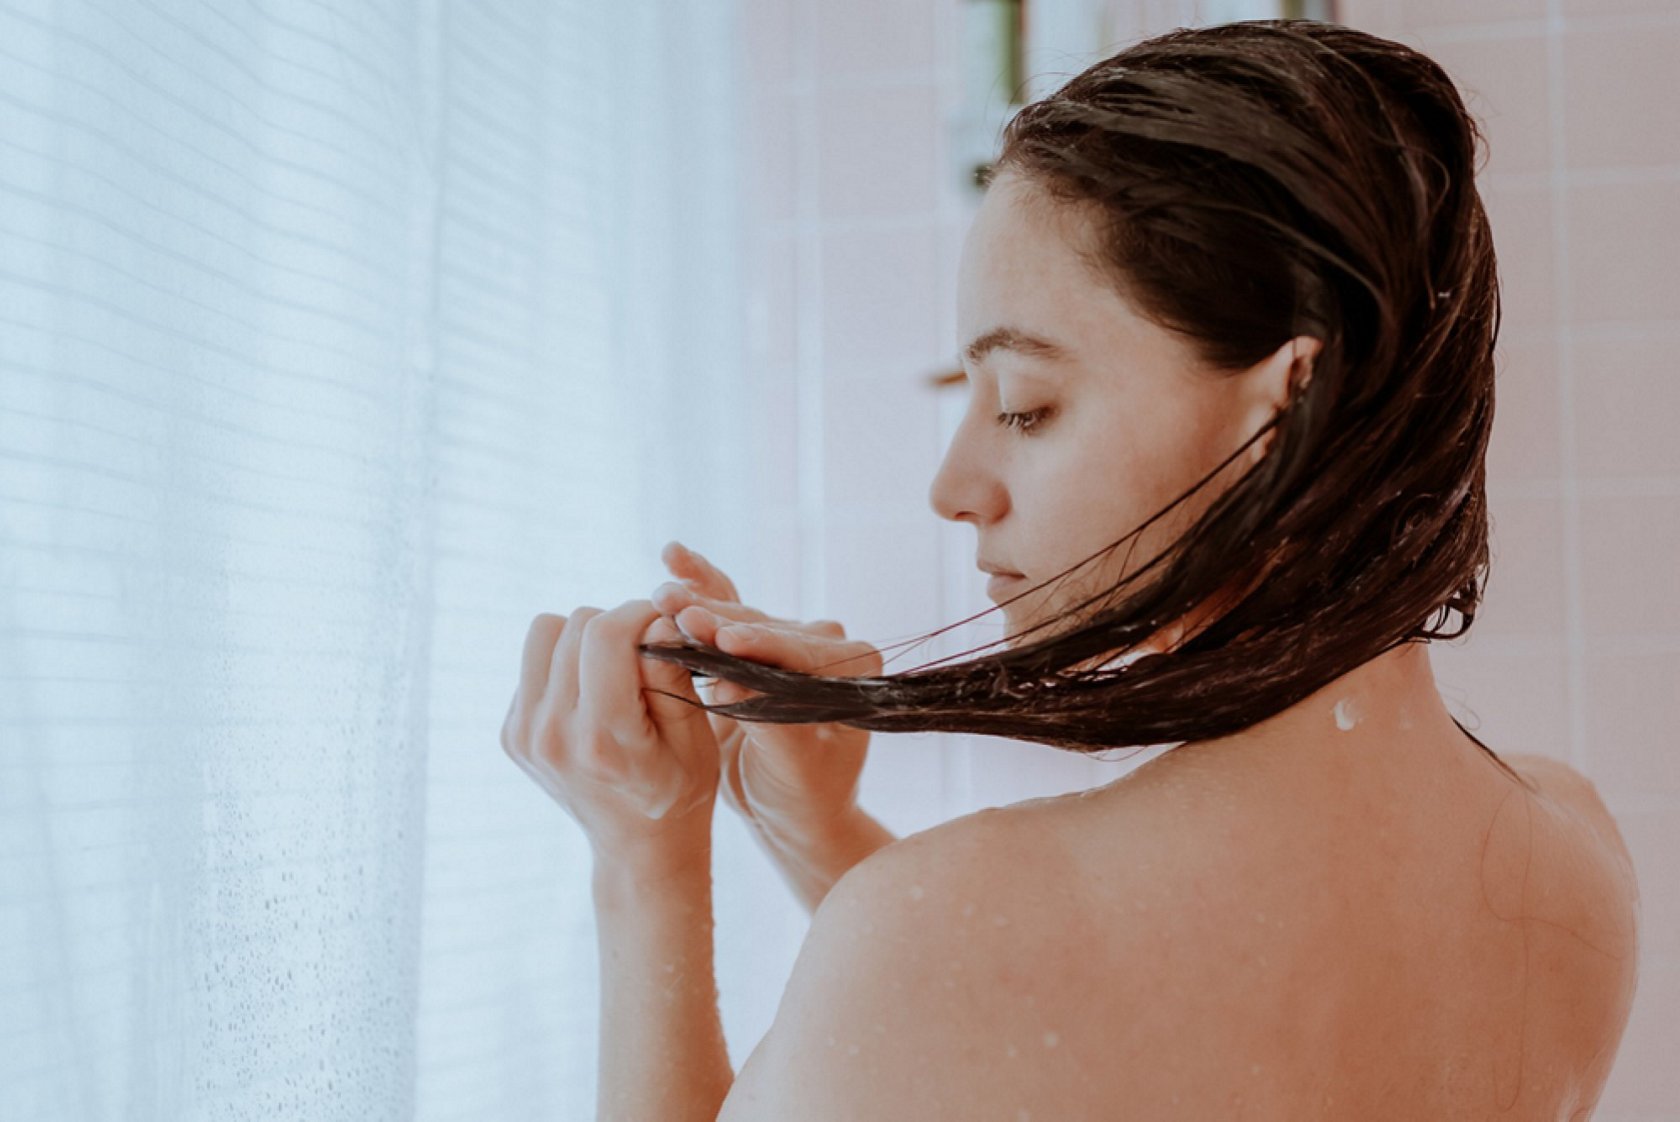 Here's How Often You Should Wash Your Hair